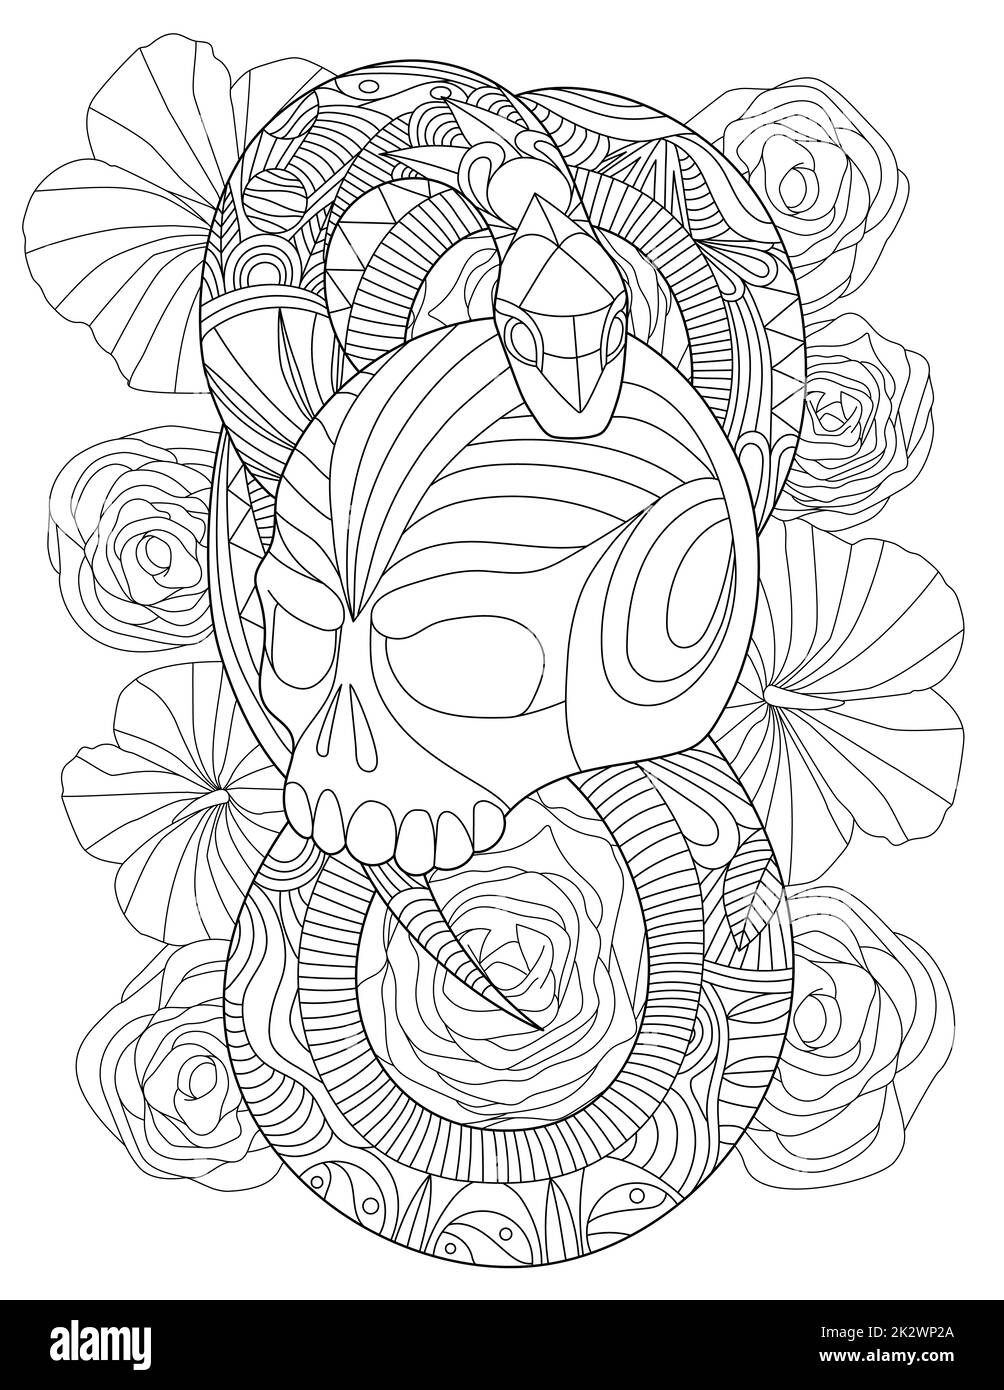 Vector line drawing tattoo snake wrapping skull decorated flower pattern background. Digital lineart image serpent twisting around bones floral decoration. Stock Photo